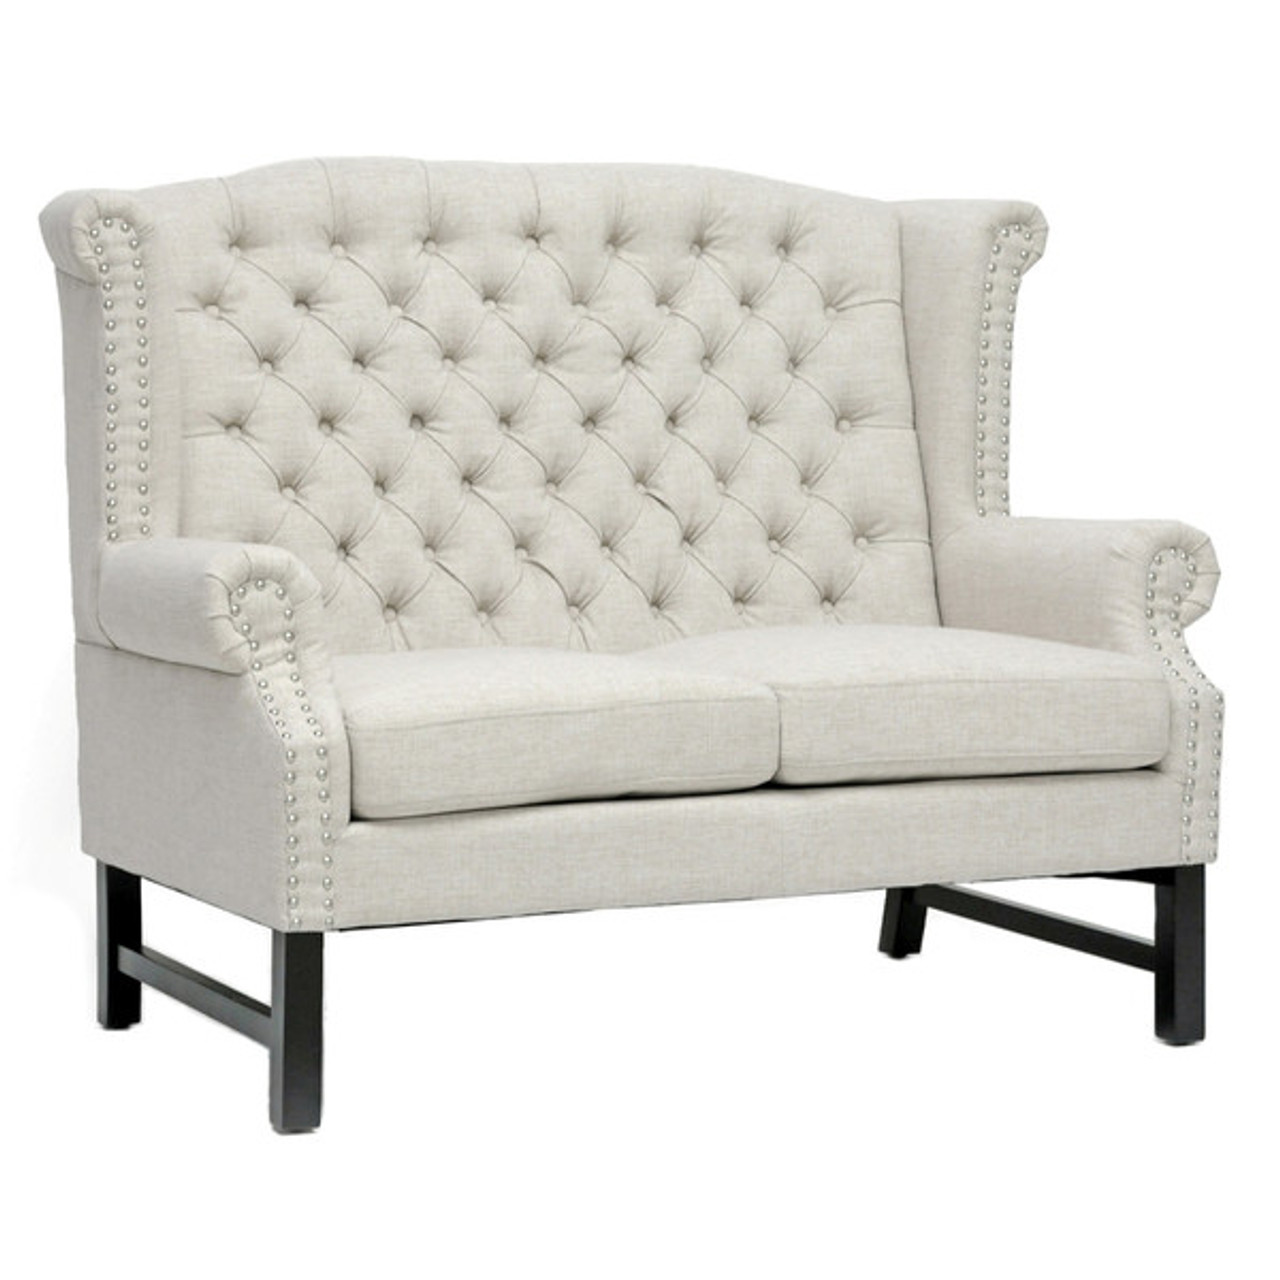 Loveseat Couch Sofa Upholstered Button Tufted Nailhead High Back Settee Beige 